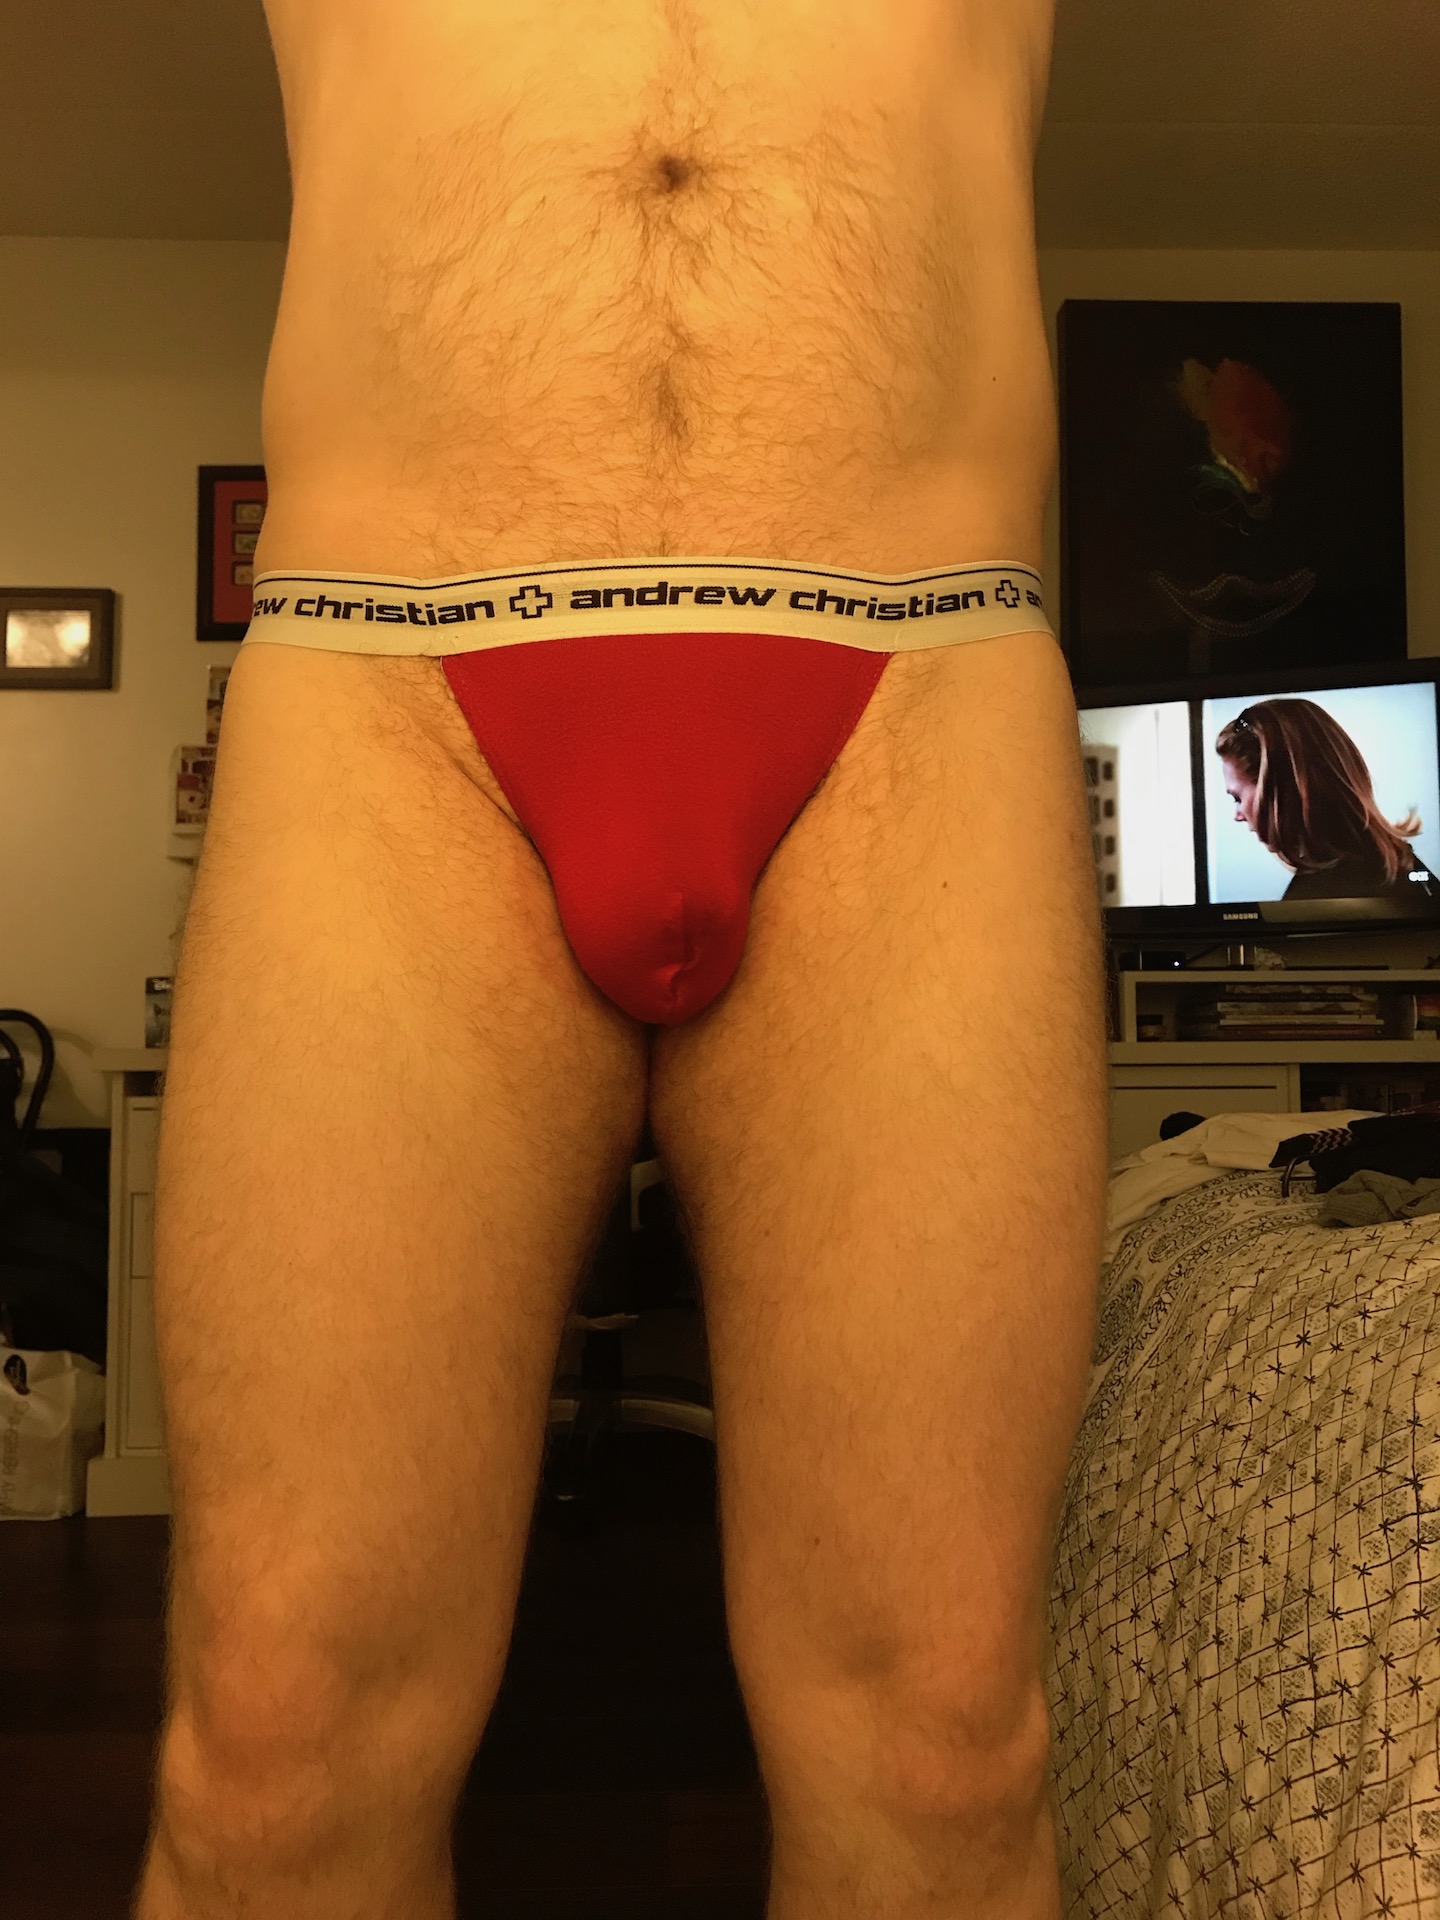 Early starts and comfortable undies…